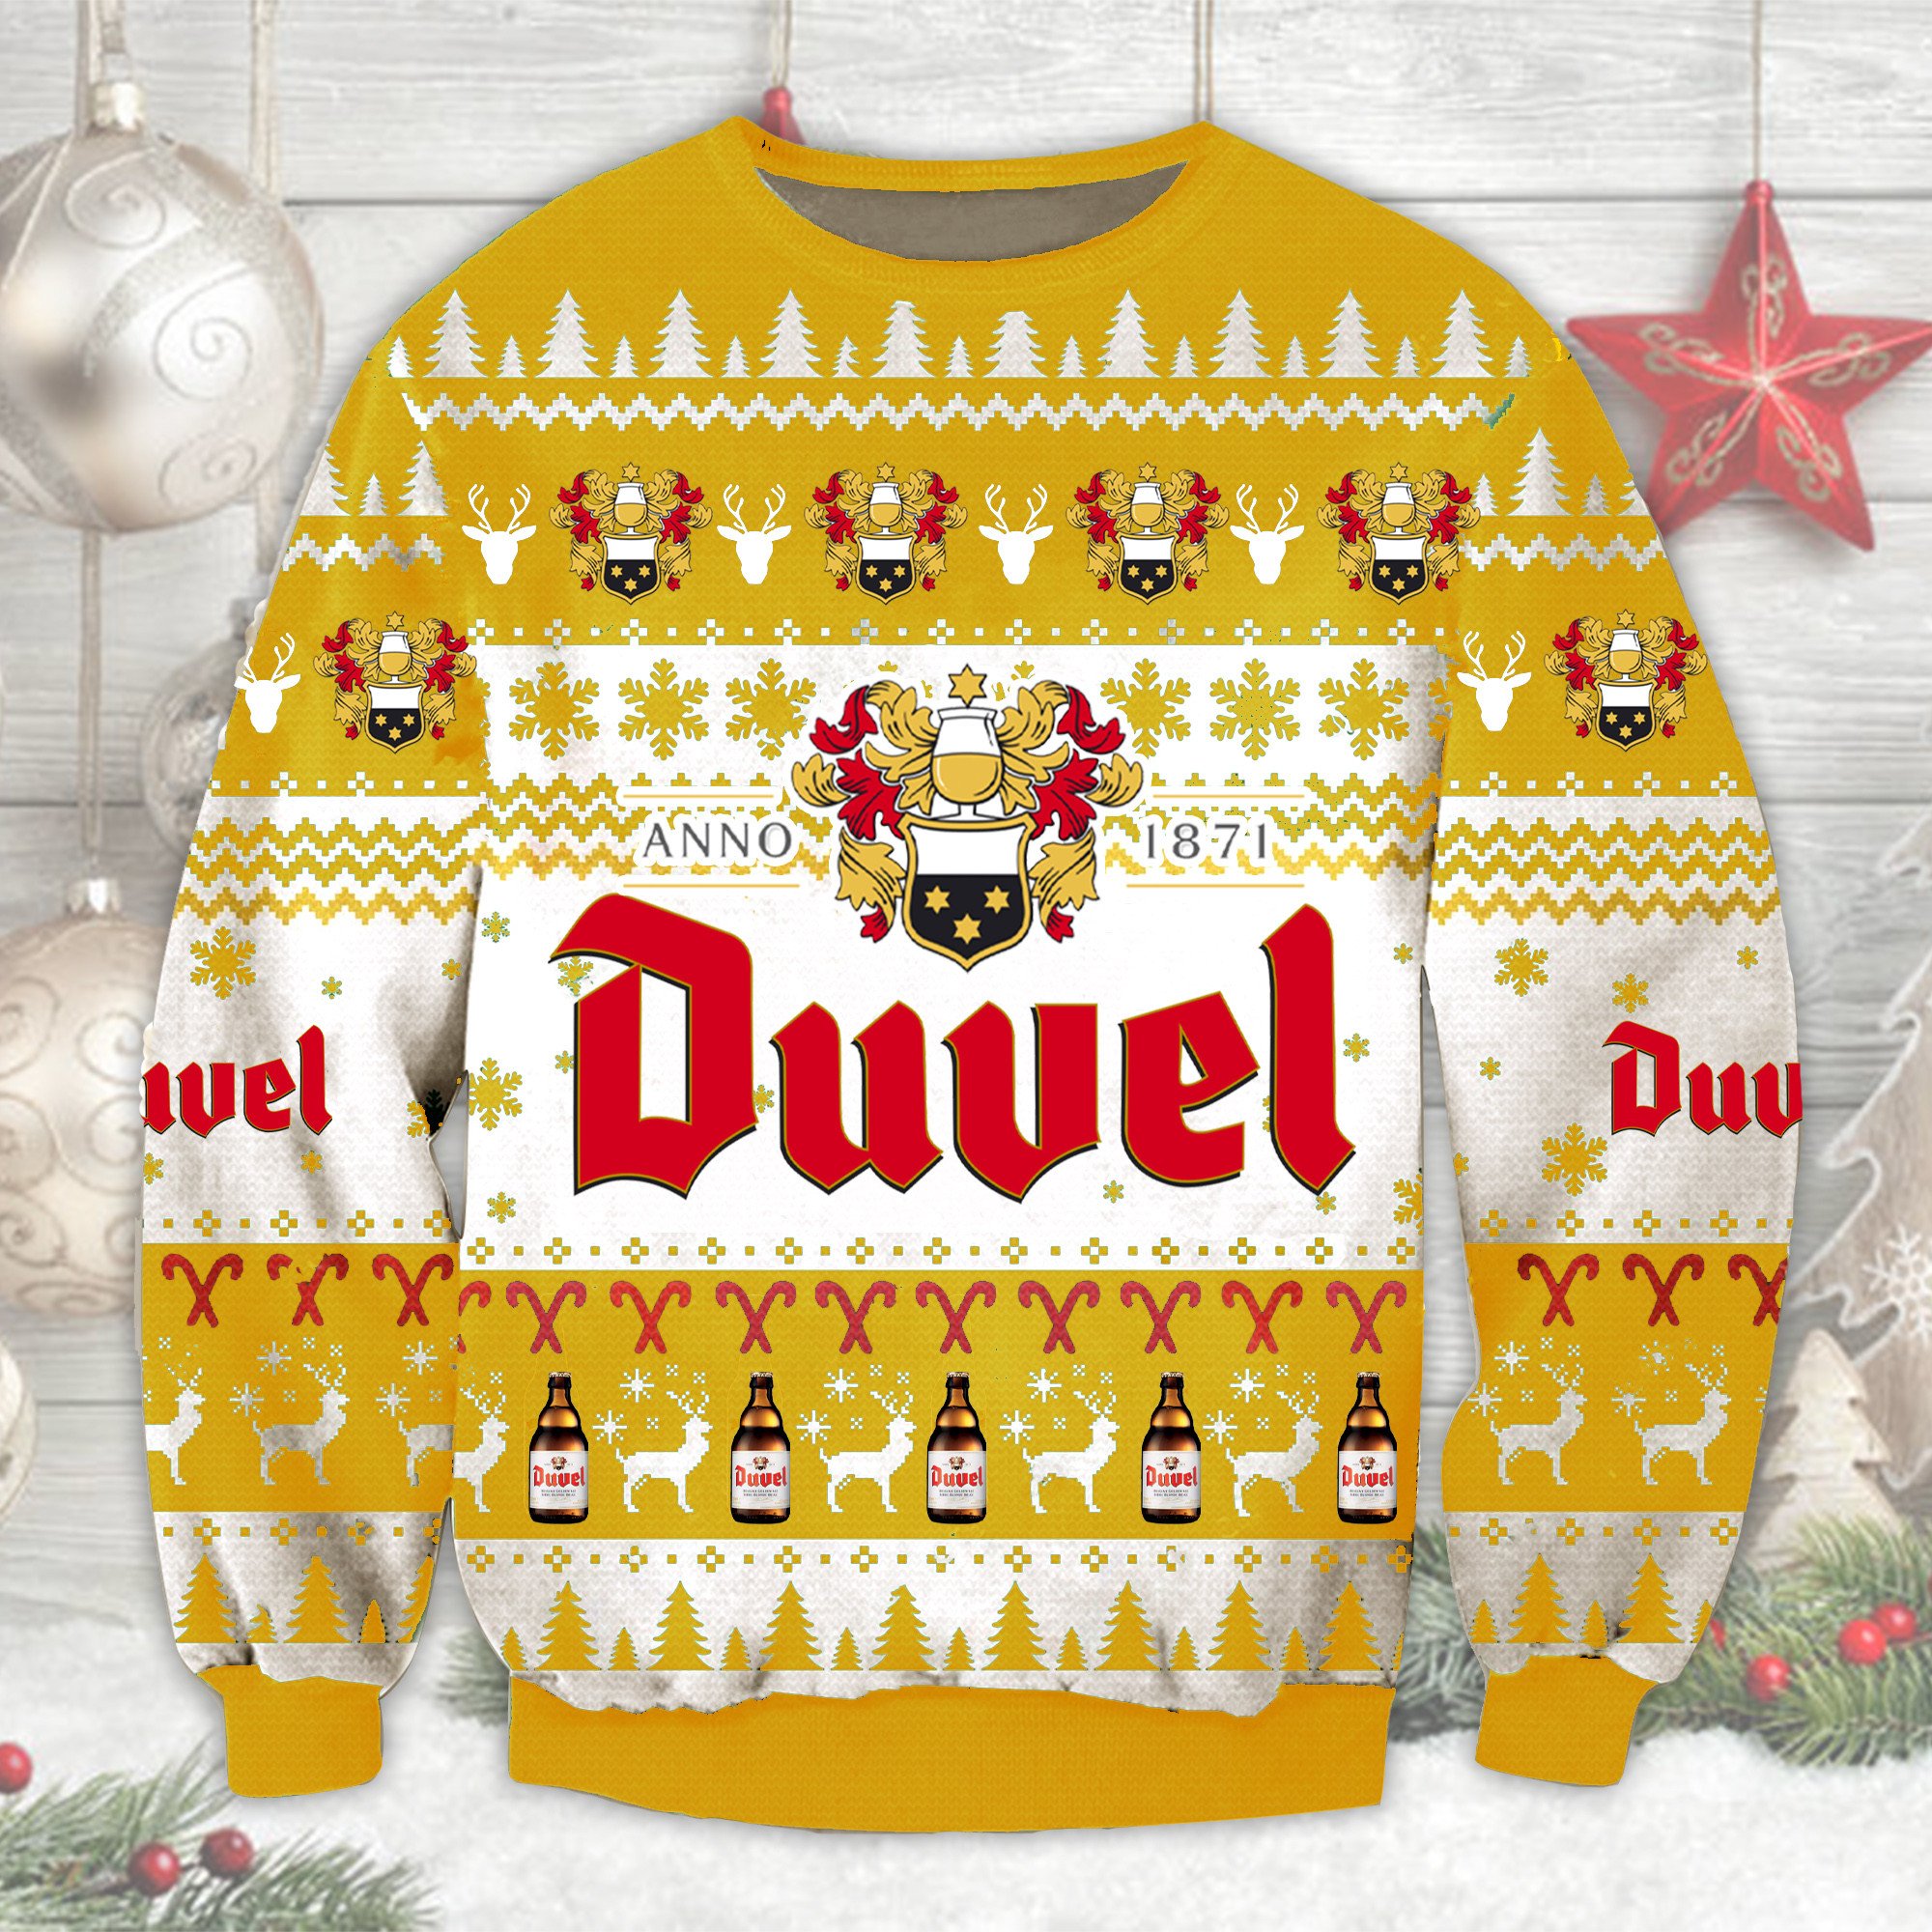 Anno 1871 Duvel Christmas Sweater 1